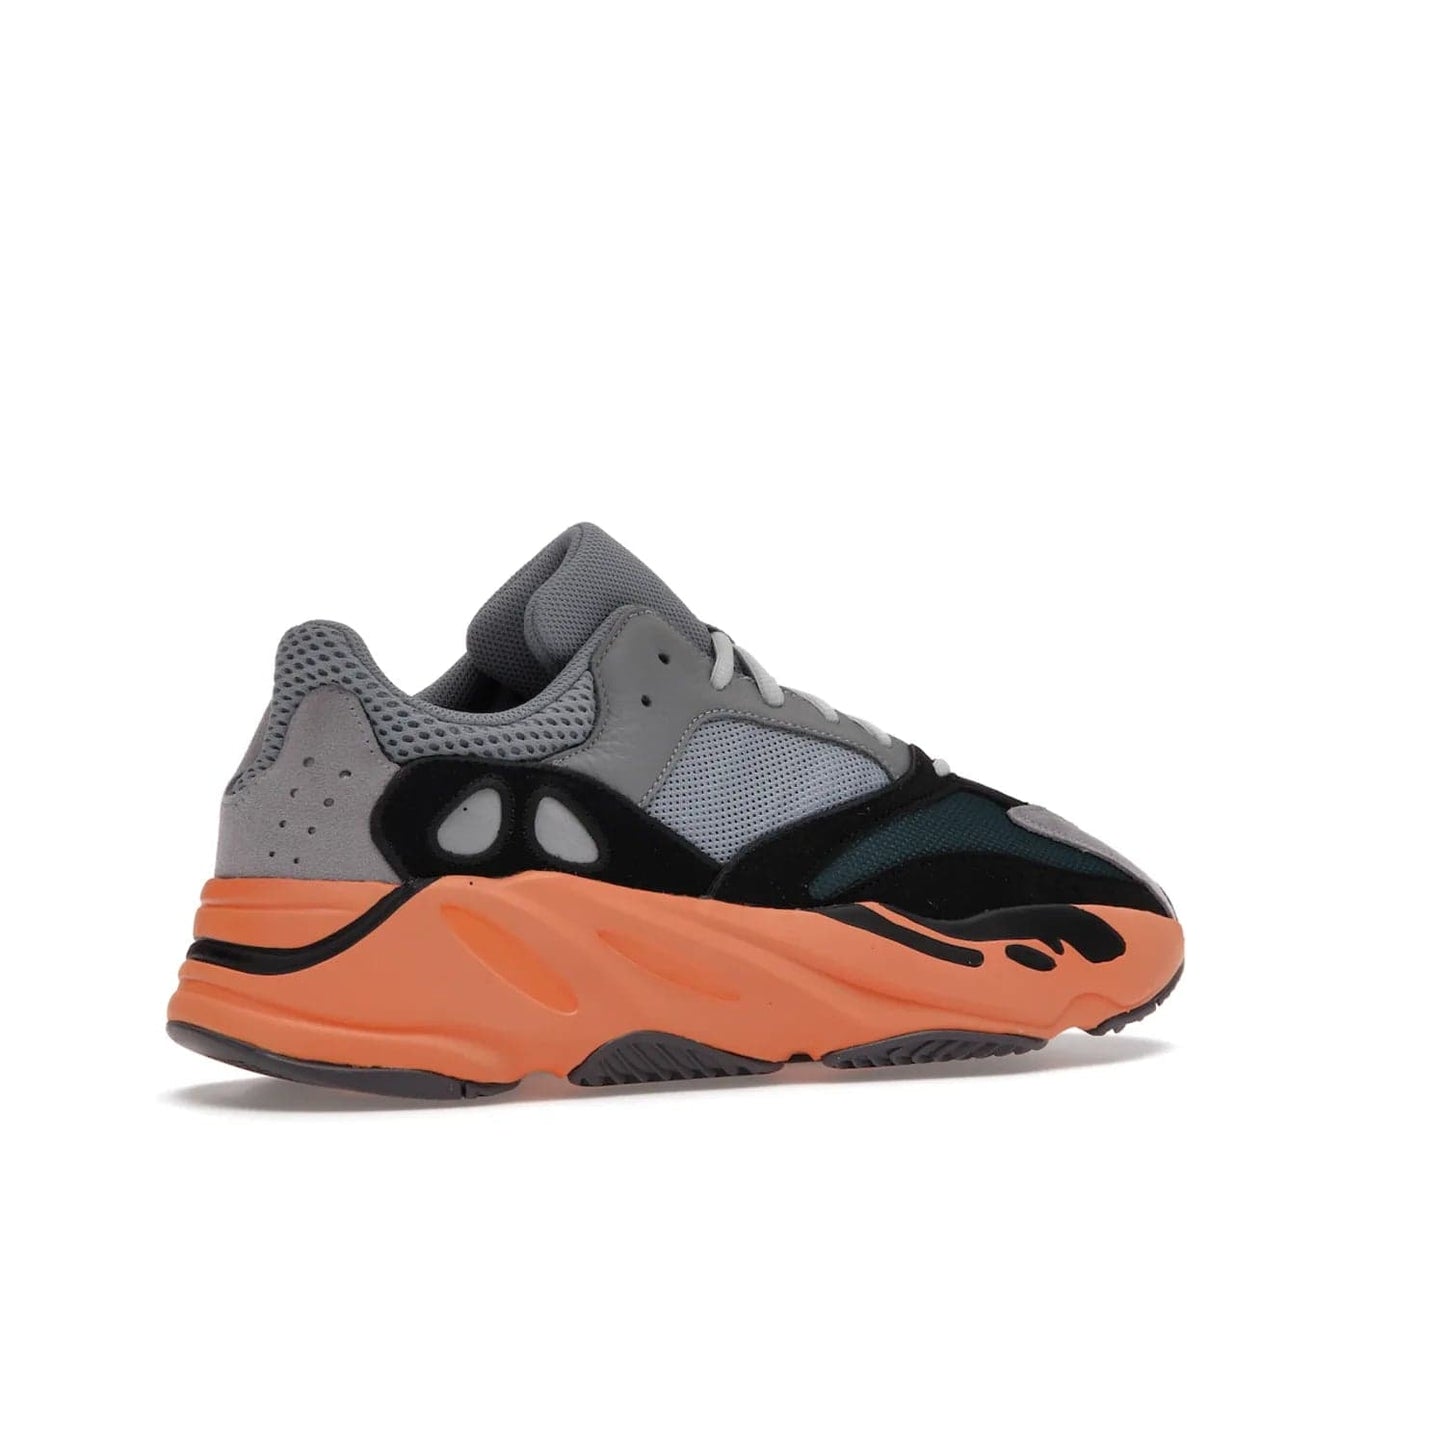 adidas Yeezy Boost 700 Wash Orange - Image 34 - Only at www.BallersClubKickz.com - Introducing the adidas Yeezy Boost 700 Wash Orange. Unique grey leather, suede, mesh upper and teal panels with a chunky Wash Orange Boost midsole. Release October 2021, make a statement today!